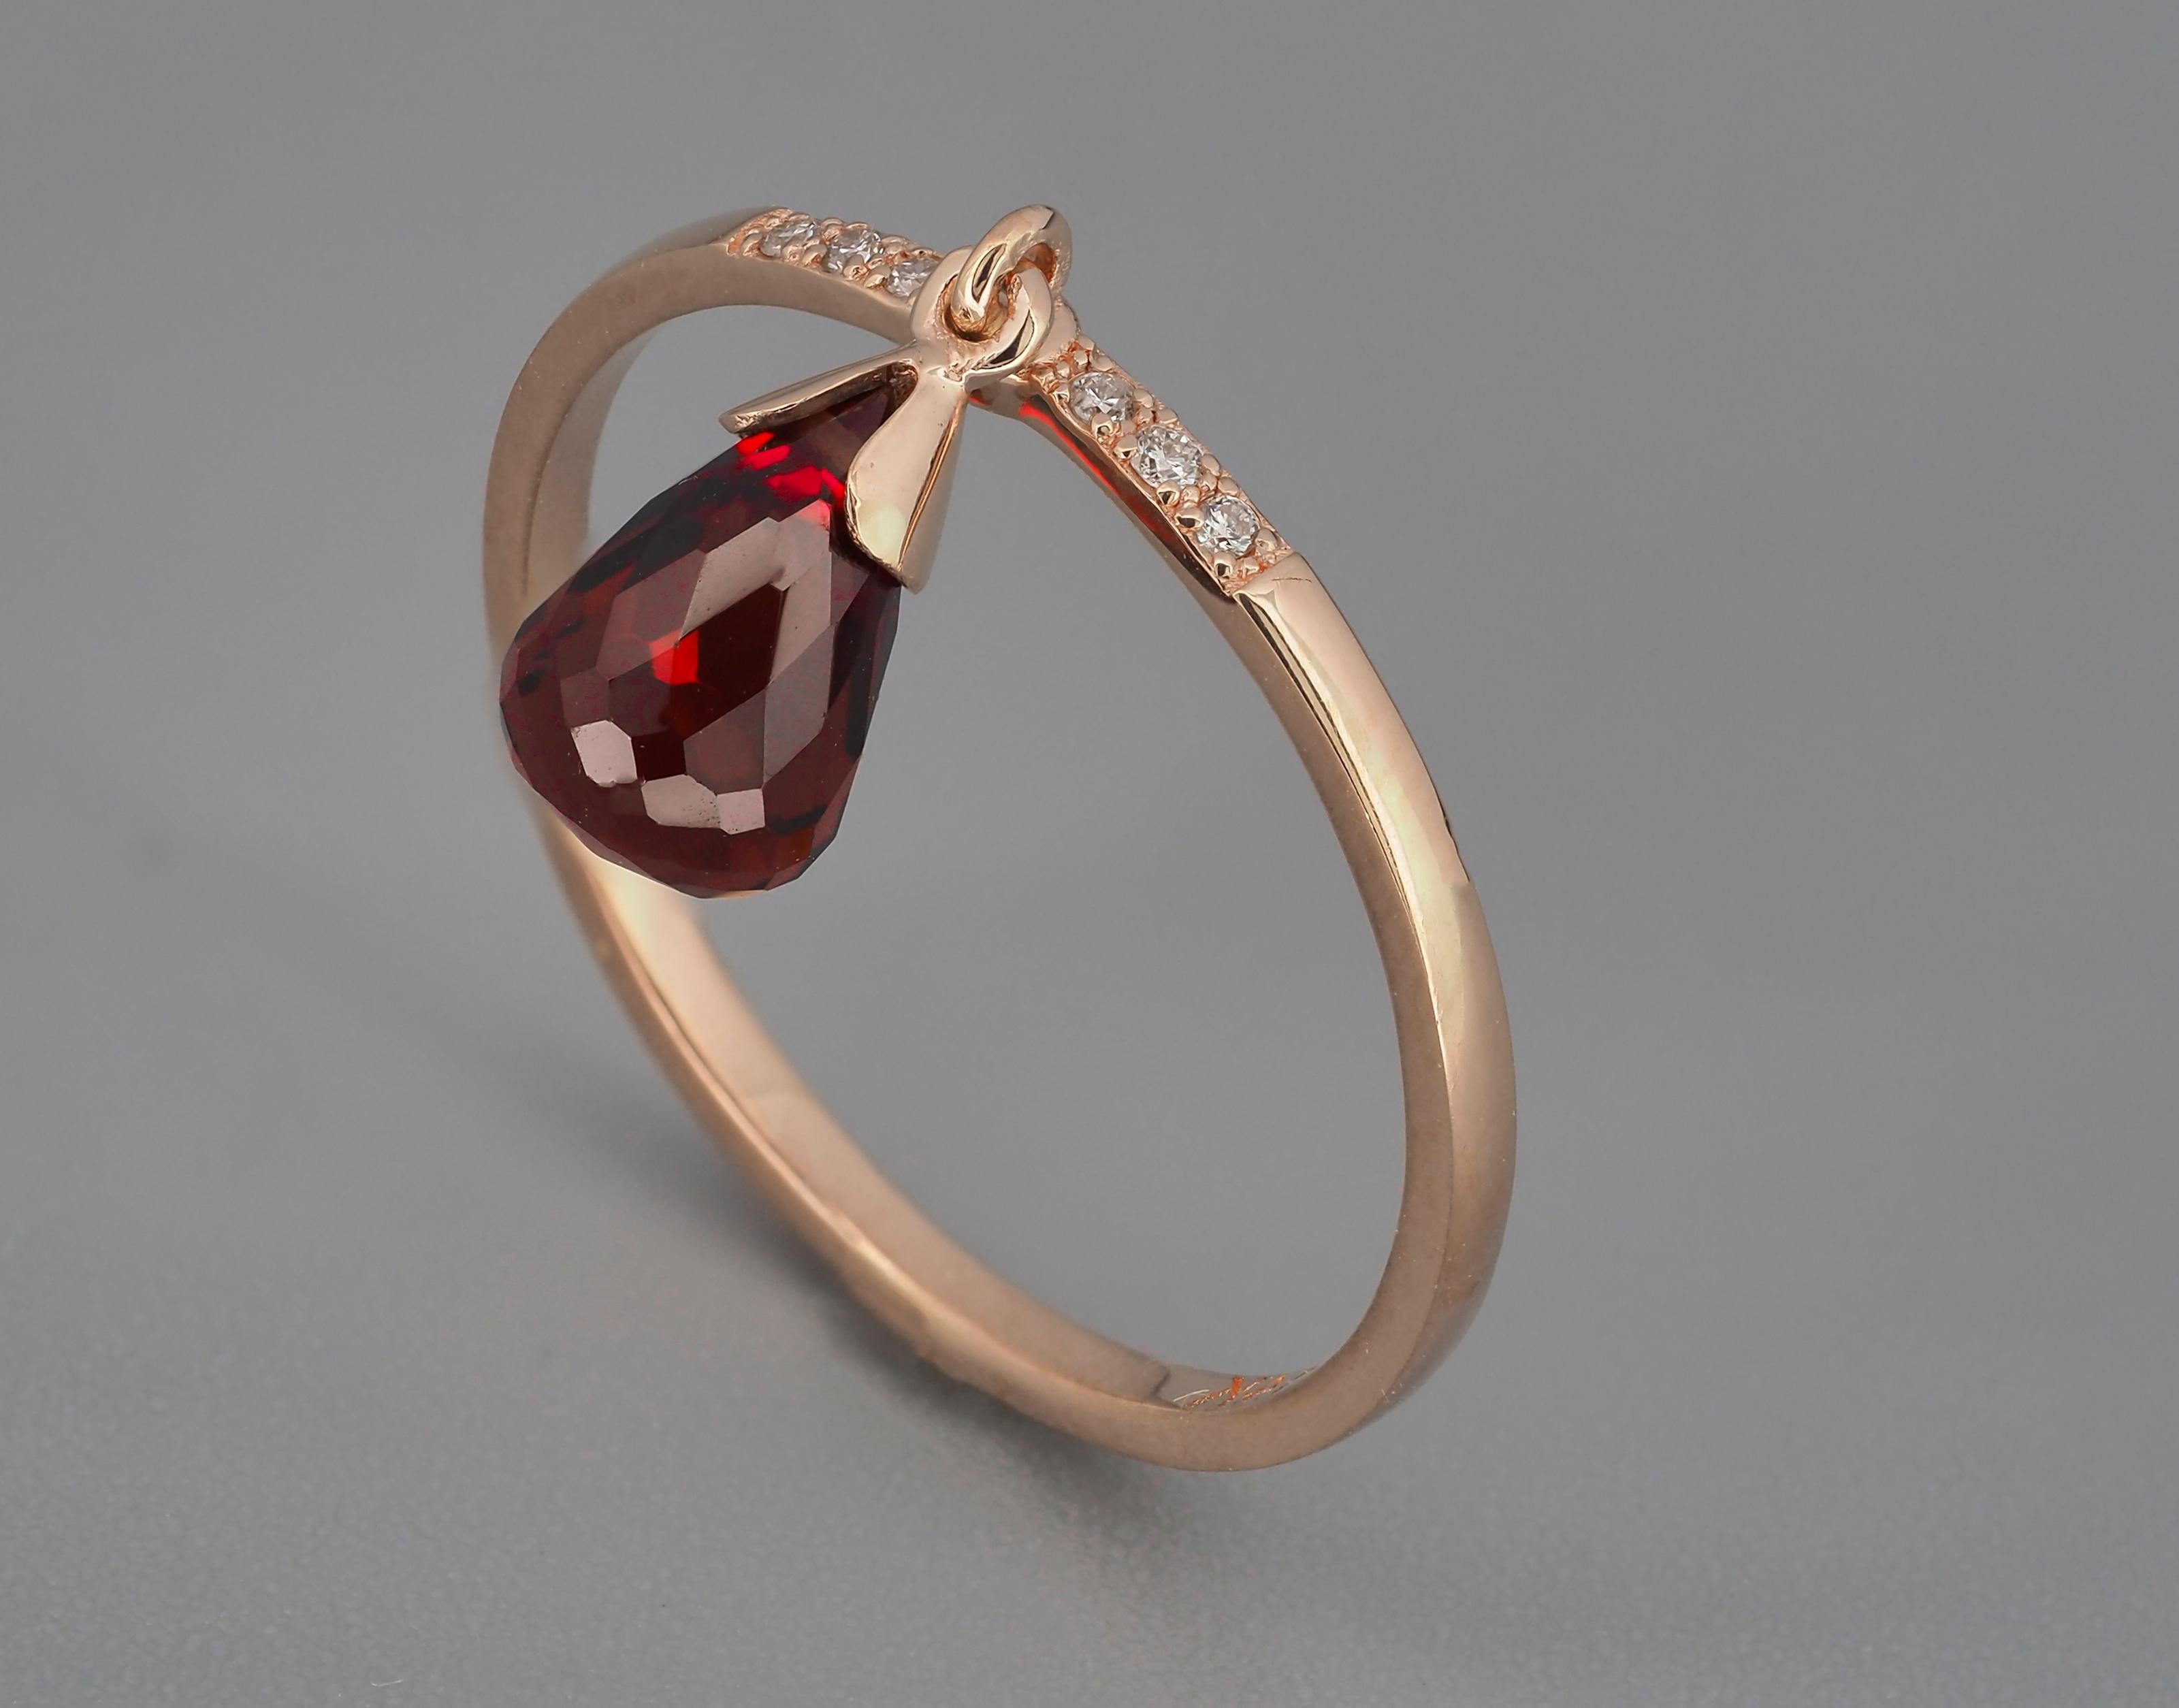 Garnet Briolette 14k Gold Ring. 
Red Garnet Ring. January Birthstone Ring. Dainty garnet Ring. Minimalist garnet ring. Delicate garnet ring.

Metal: 14k gold
Total weight: 1.6 g. depends from size.

Central stone: Natural Garnet - 1 piece
Cut: